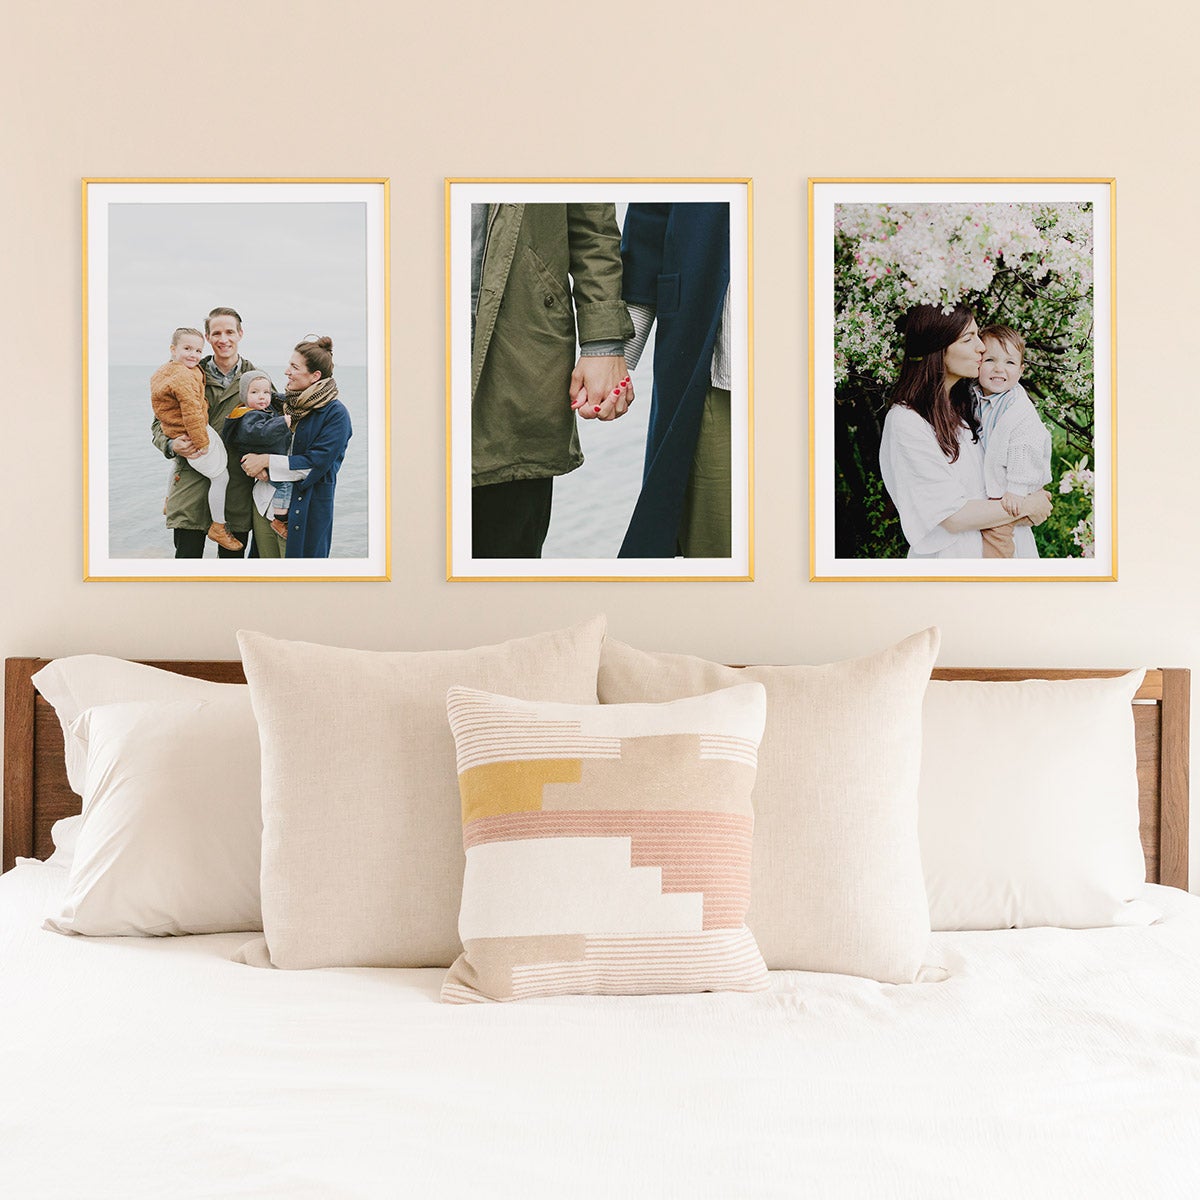 Series of framed family photos above bed